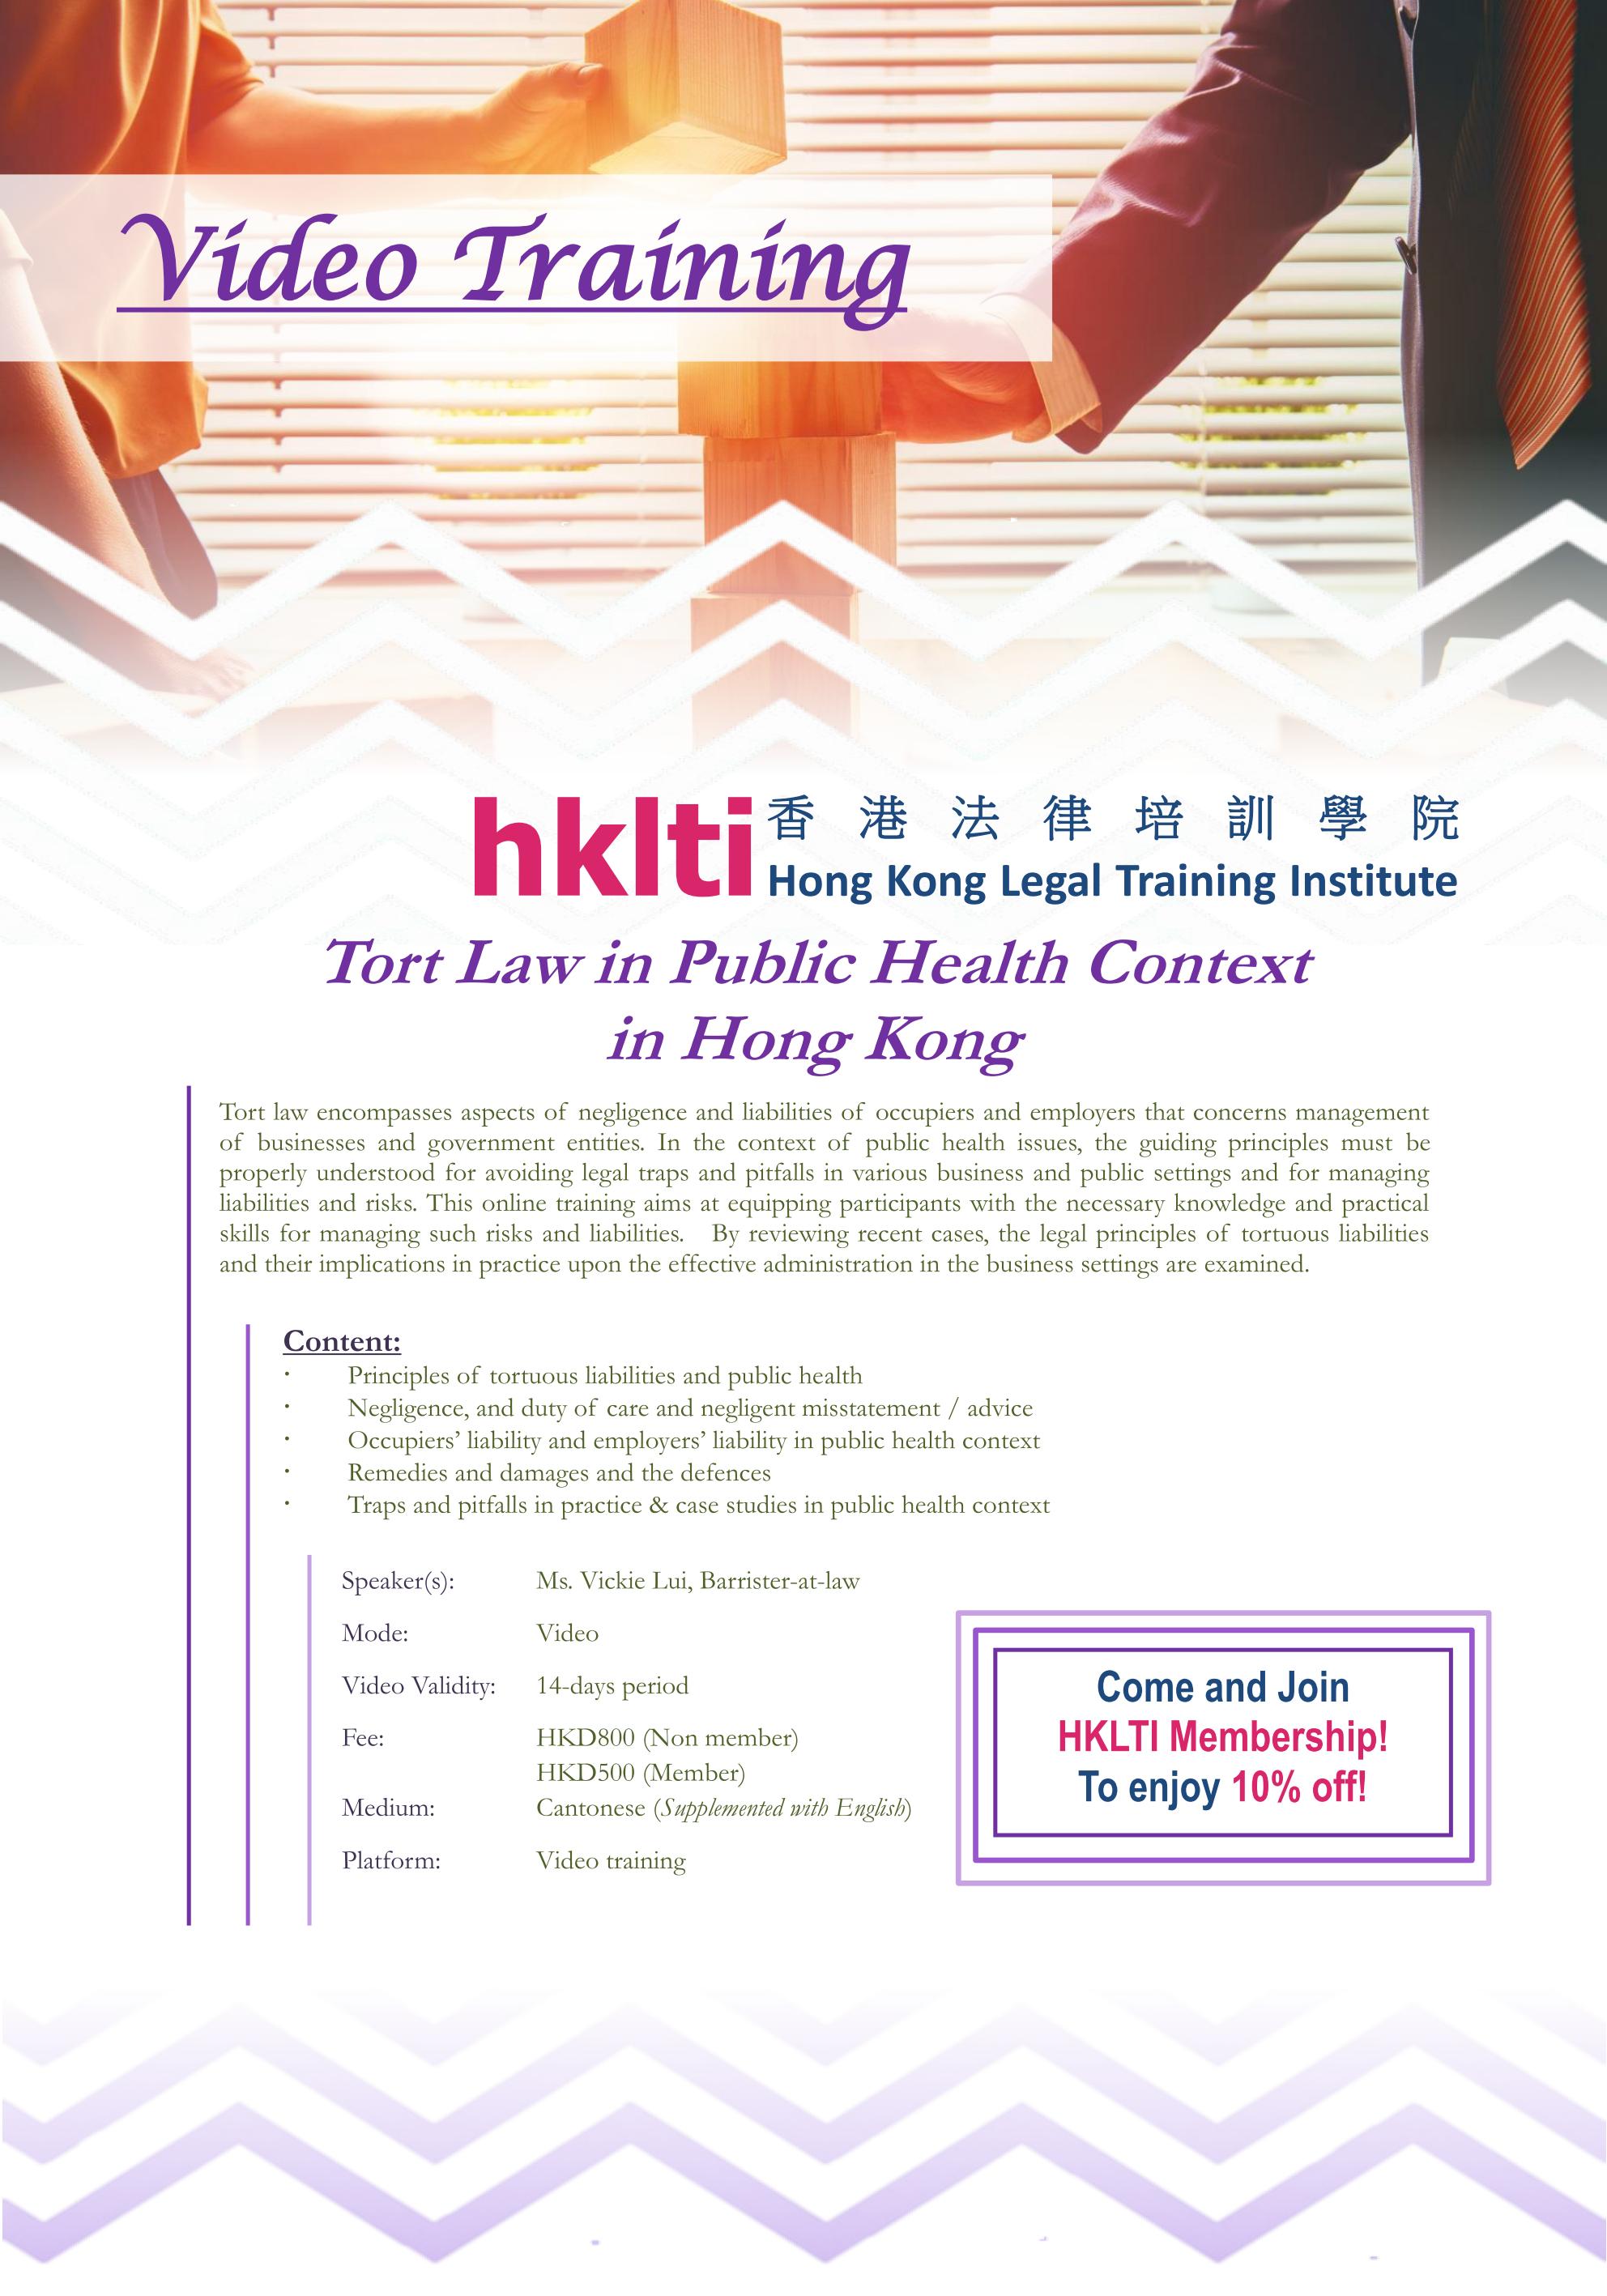 HKLTI video training Tort Law in Public Health Context in Hong Kong flyer new